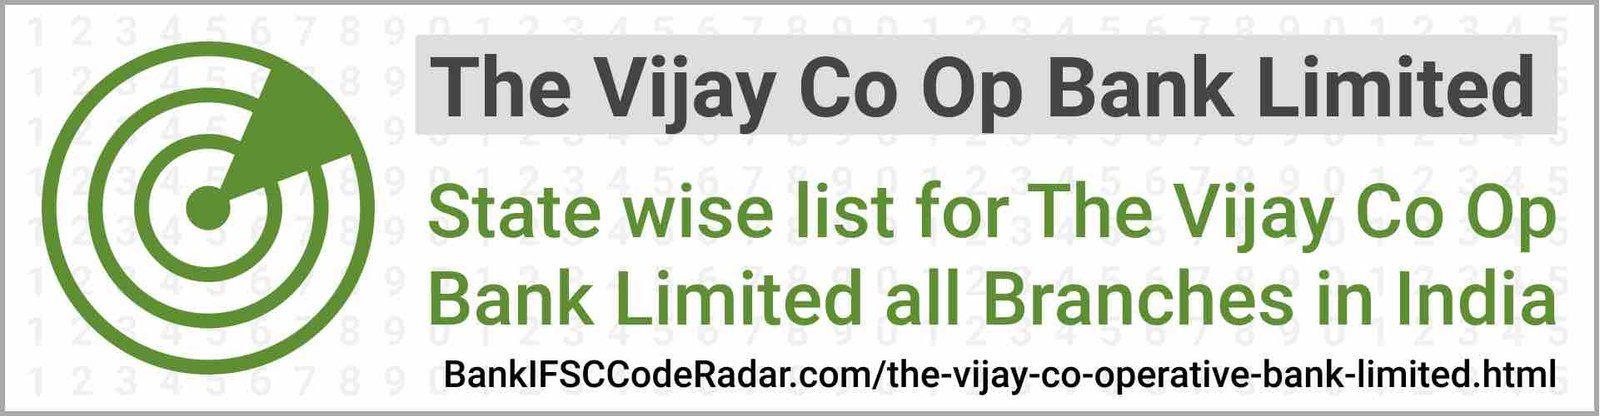 The Vijay Co Operative Bank Limited All Branches India